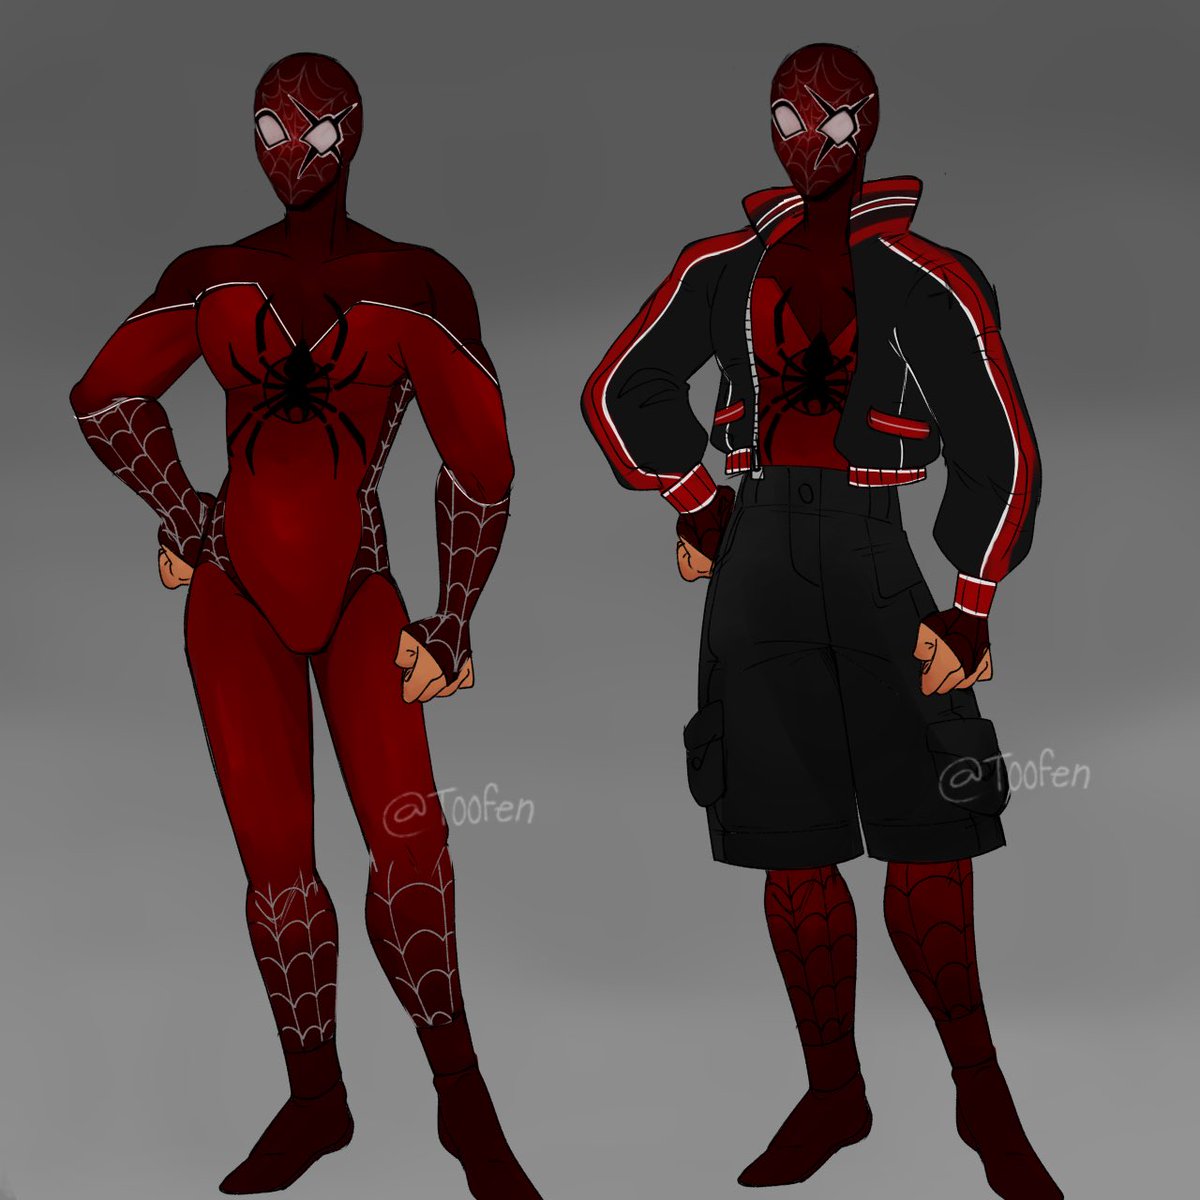 SPIDERMAN OC!!!!!
he’s from the same earth as gwen..and stayed while she was gone….but yeah…
now I have a spidersona AND spider oc..OH OH OH OH🔥
#atsv #itsv #IntoTheSpiderVerse #AcrossTheSpiderVerse #spidermanoc #SpiderMan #oc #originalcharacter #digitalart